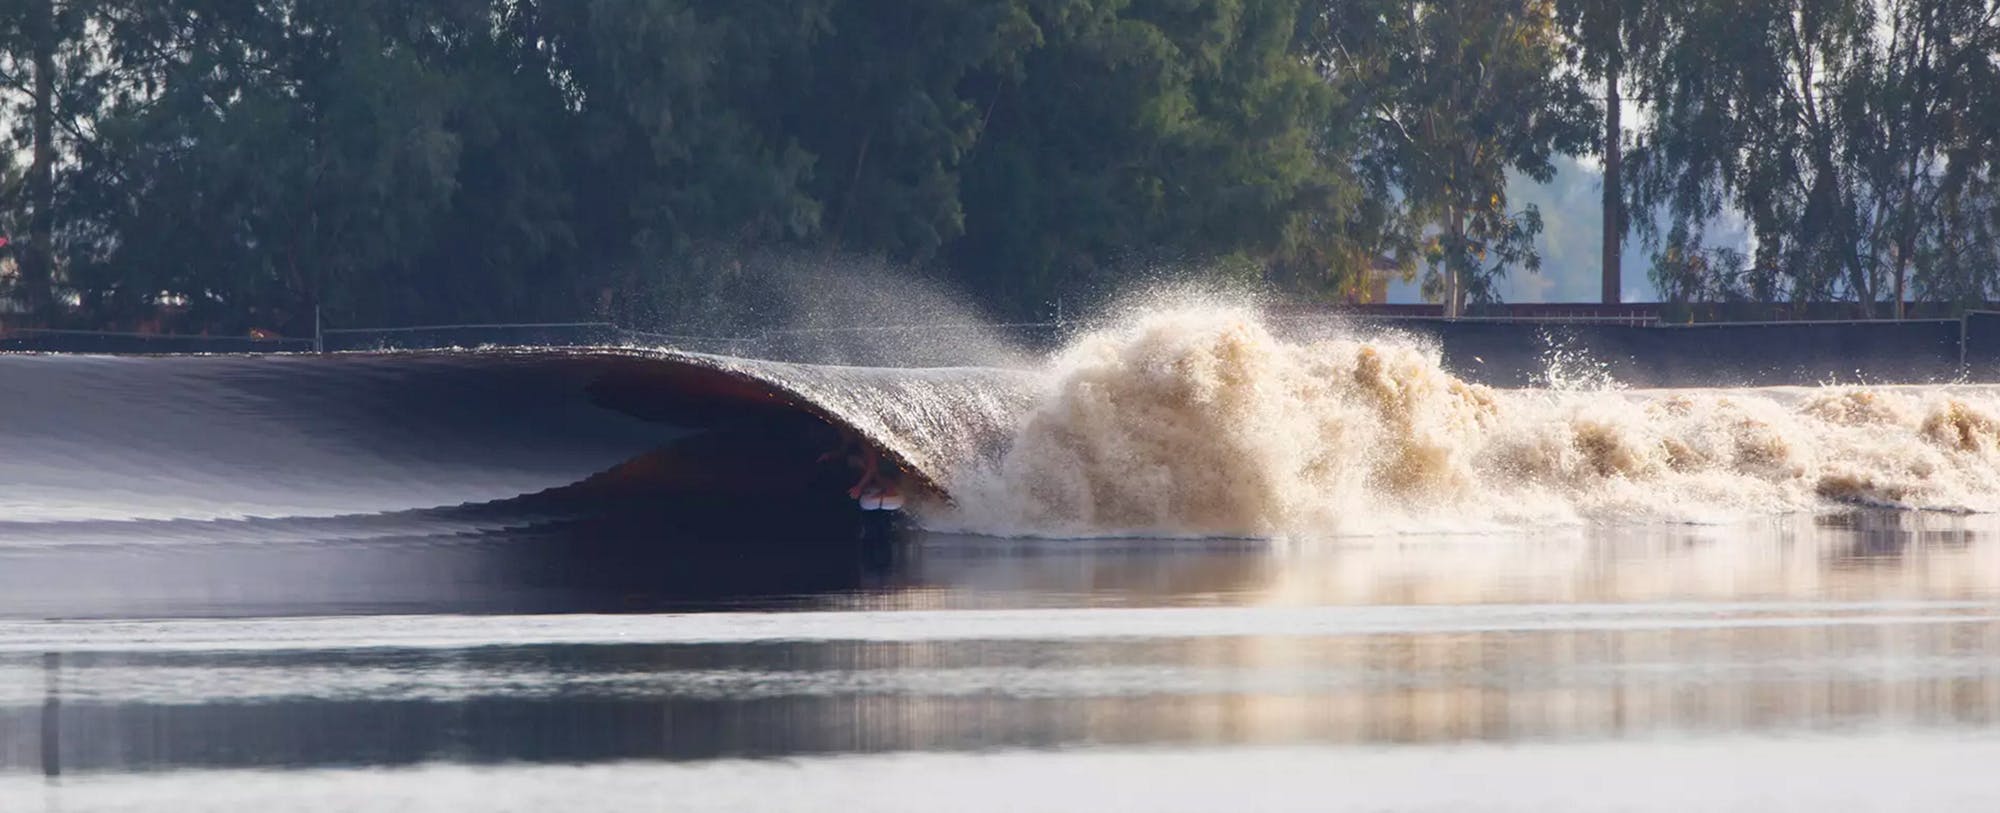 Kelly Slater and The World’s Best Man-Made Wave 